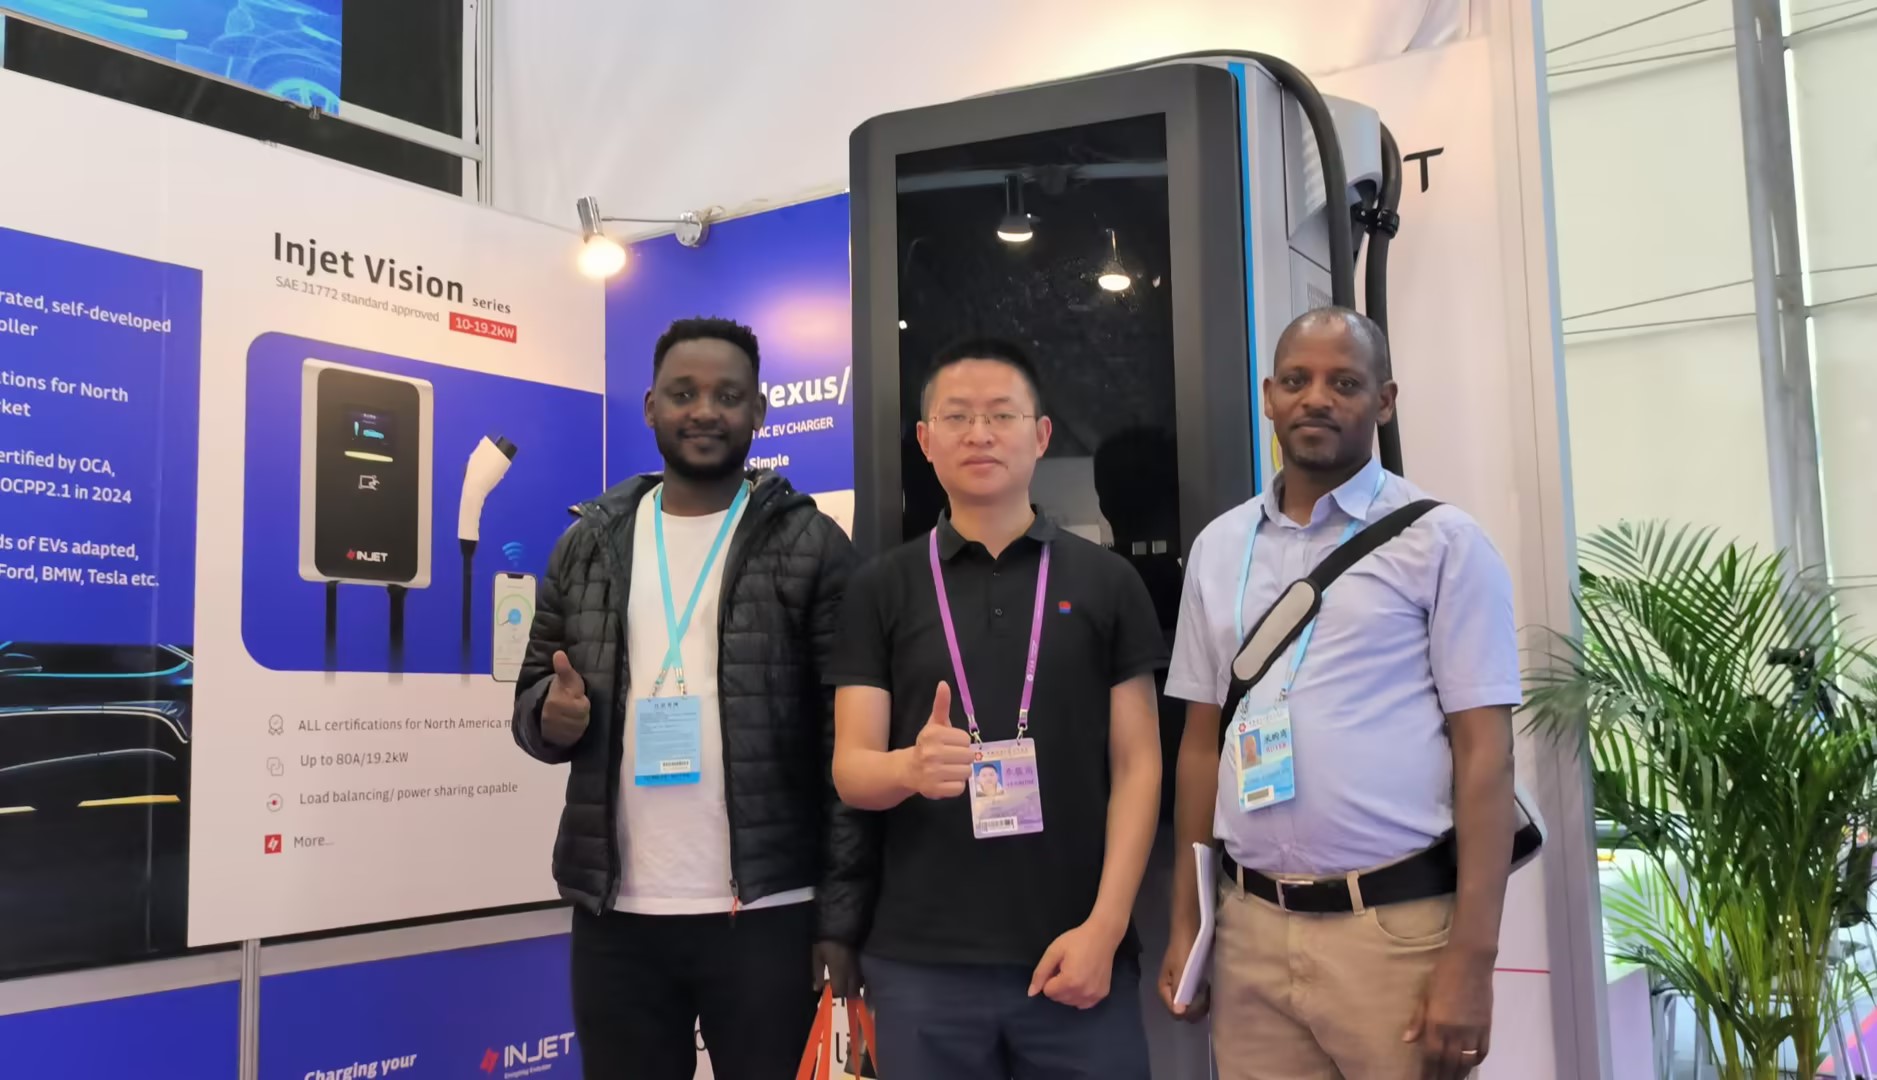 Injet New Energy Debuts at Canton Fair, Driving New Energy Charging Innovation with Green Technology